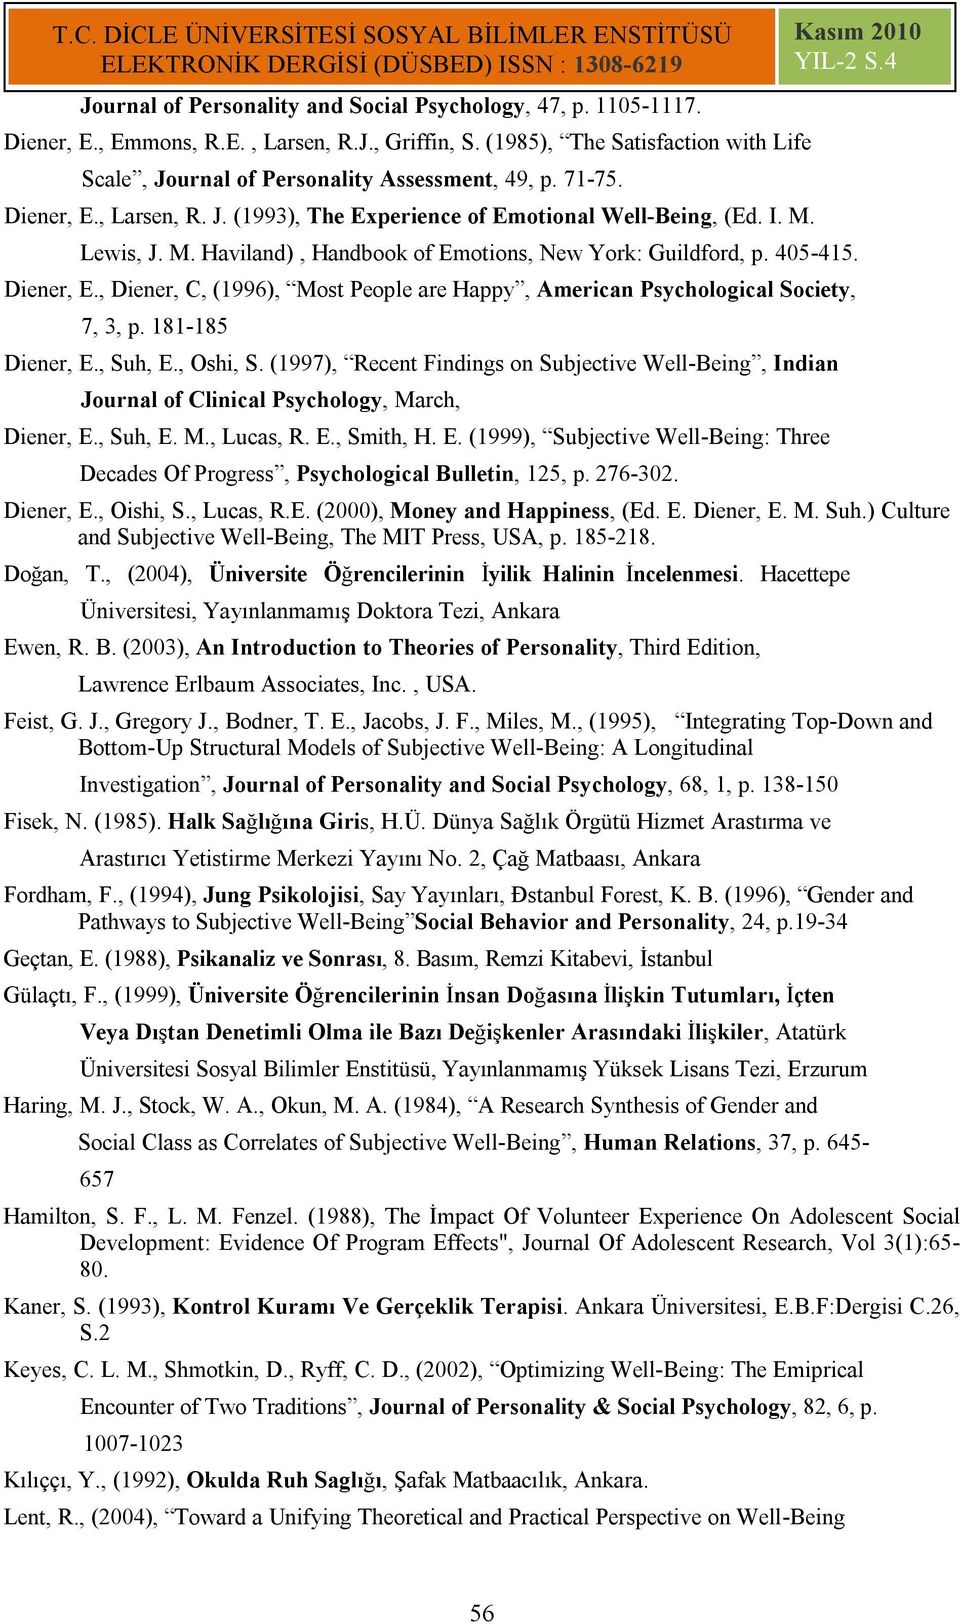 181-185 Diener, E., Suh, E., Oshi, S. (1997), Recent Findings on Subjective Well-Being, Indian Journal of Clinical Psychology, March, Diener, E., Suh, E. M., Lucas, R. E., Smith, H. E. (1999), Subjective Well-Being: Three Decades Of Progress, Psychological Bulletin, 125, p.